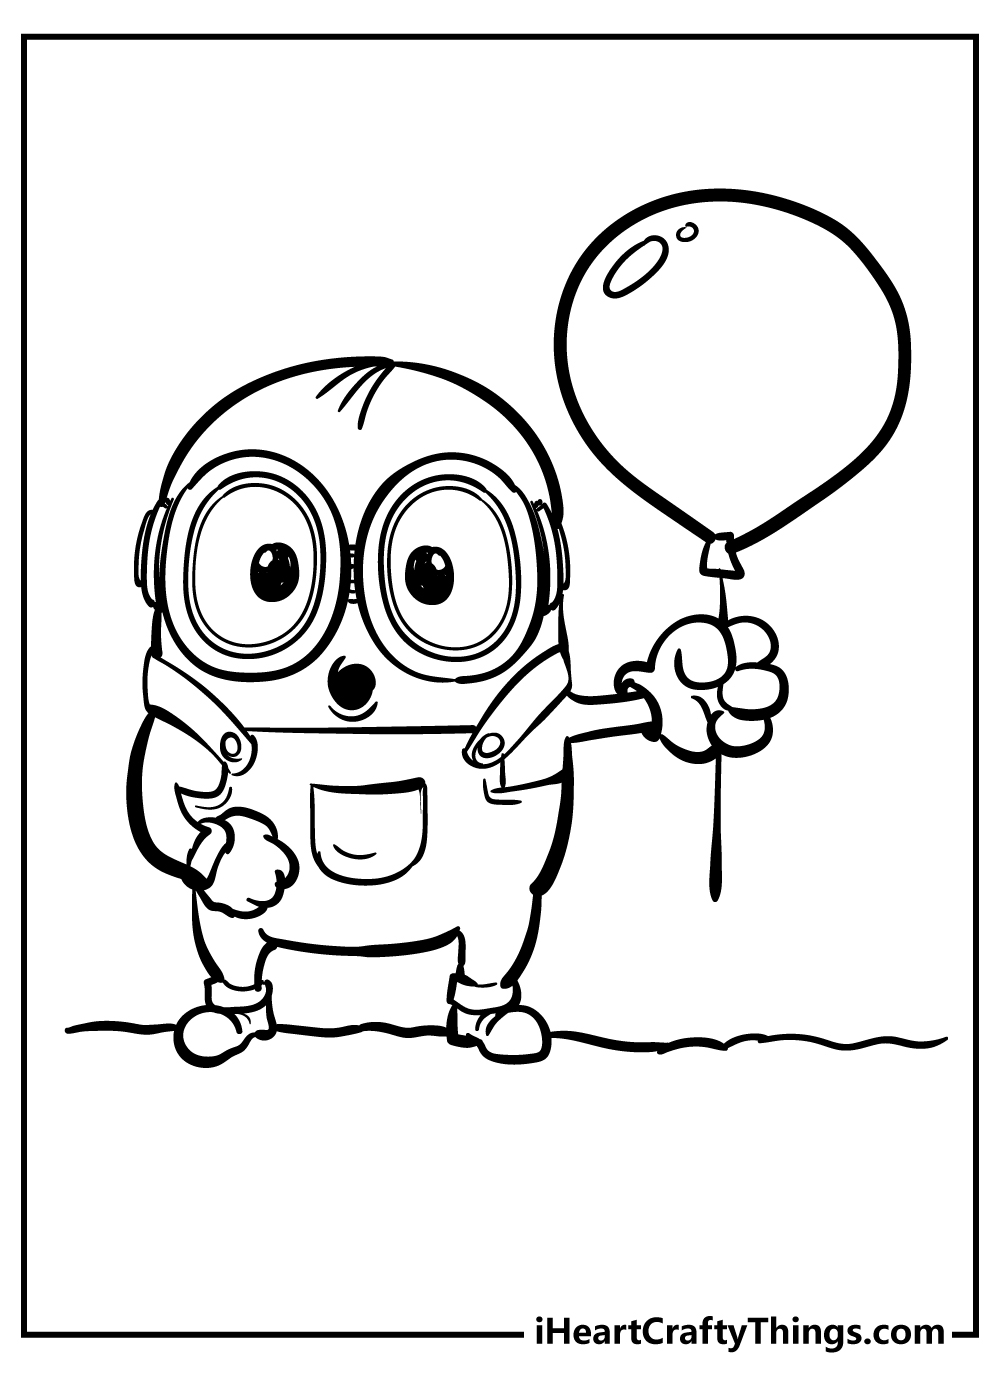 Minions coloring pages free printables